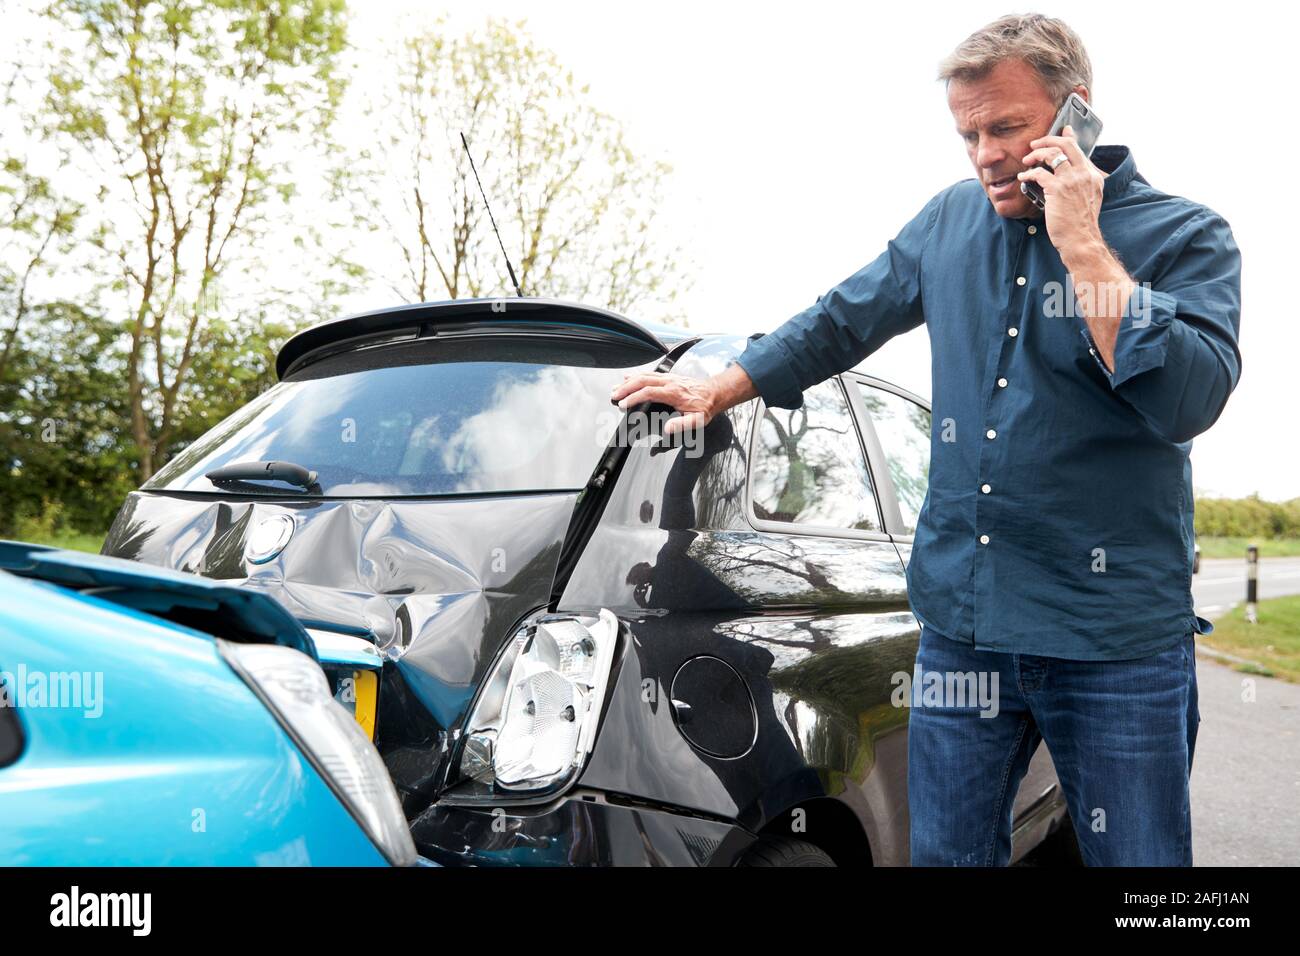 Mature Male Motorist Involved In Car Accident Calling Insurance Company Or Recovery Service Stock Photo